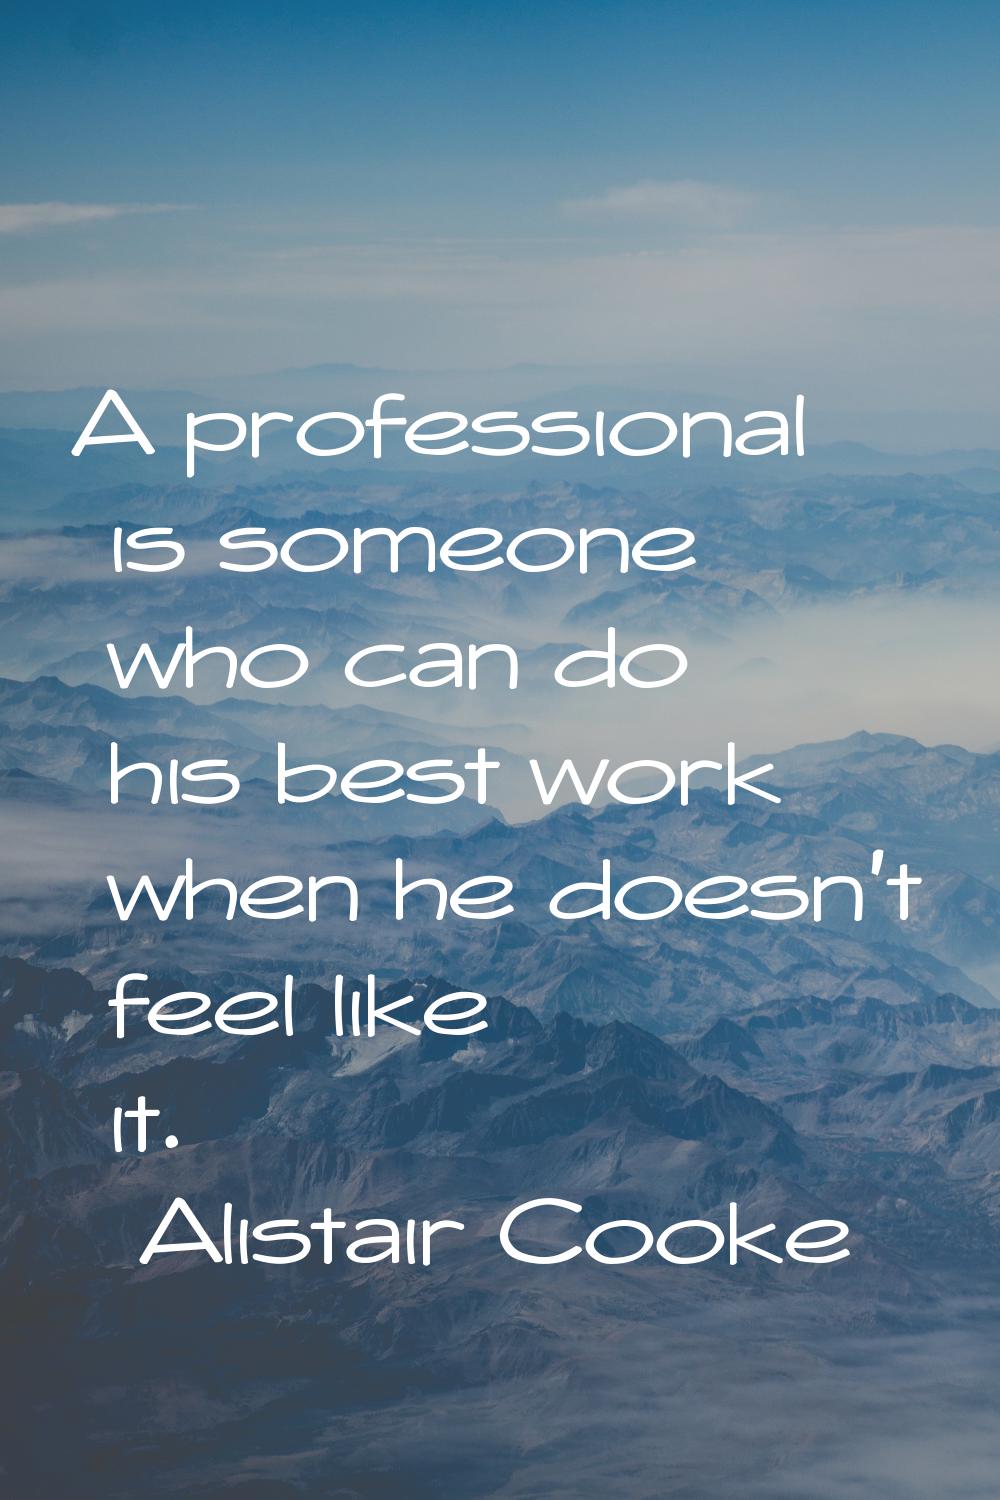 A professional is someone who can do his best work when he doesn't feel like it.